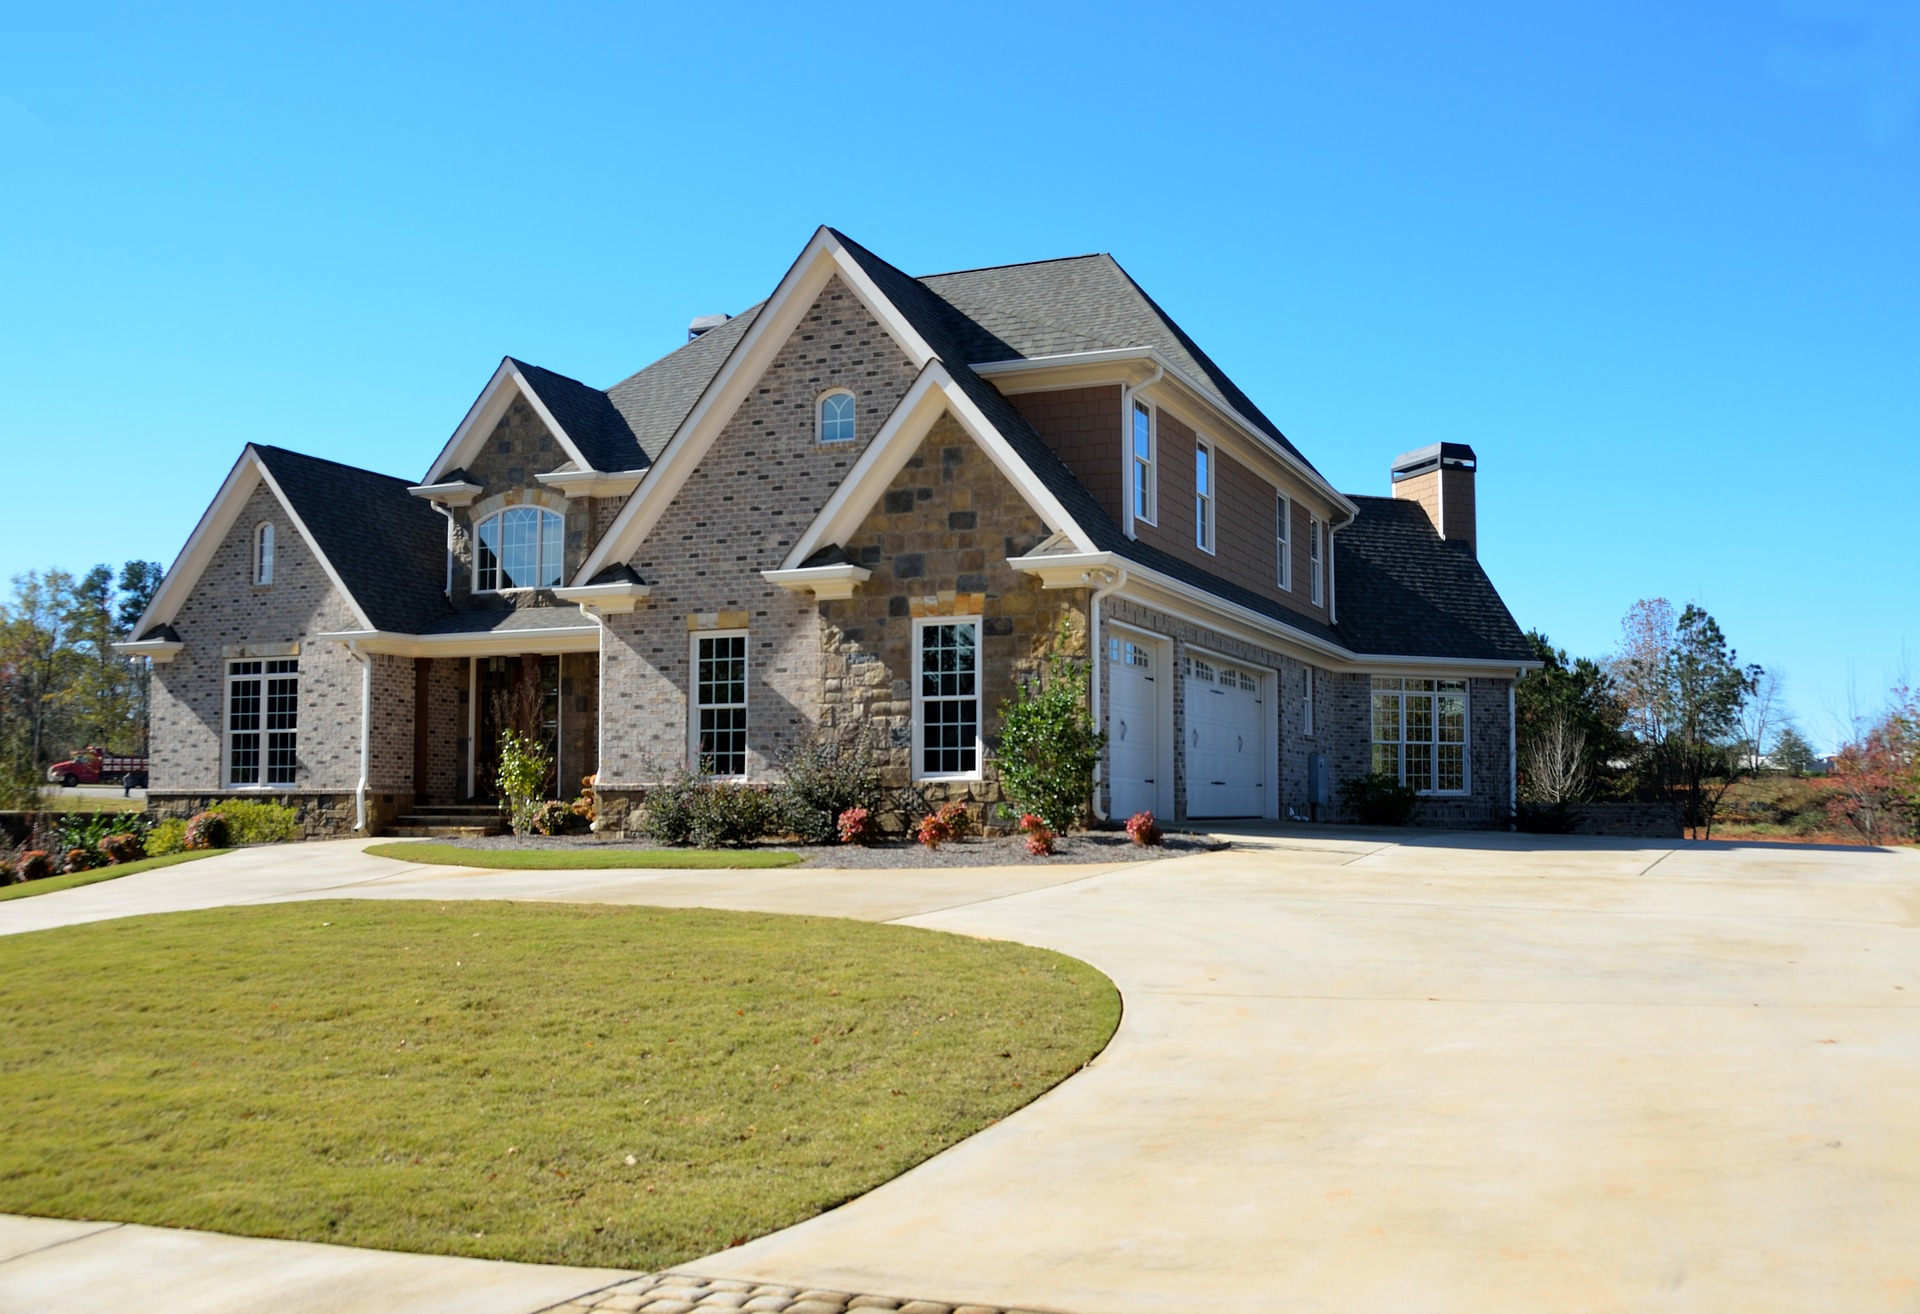 Concrete Driveways and Circle Driveway - College Station 